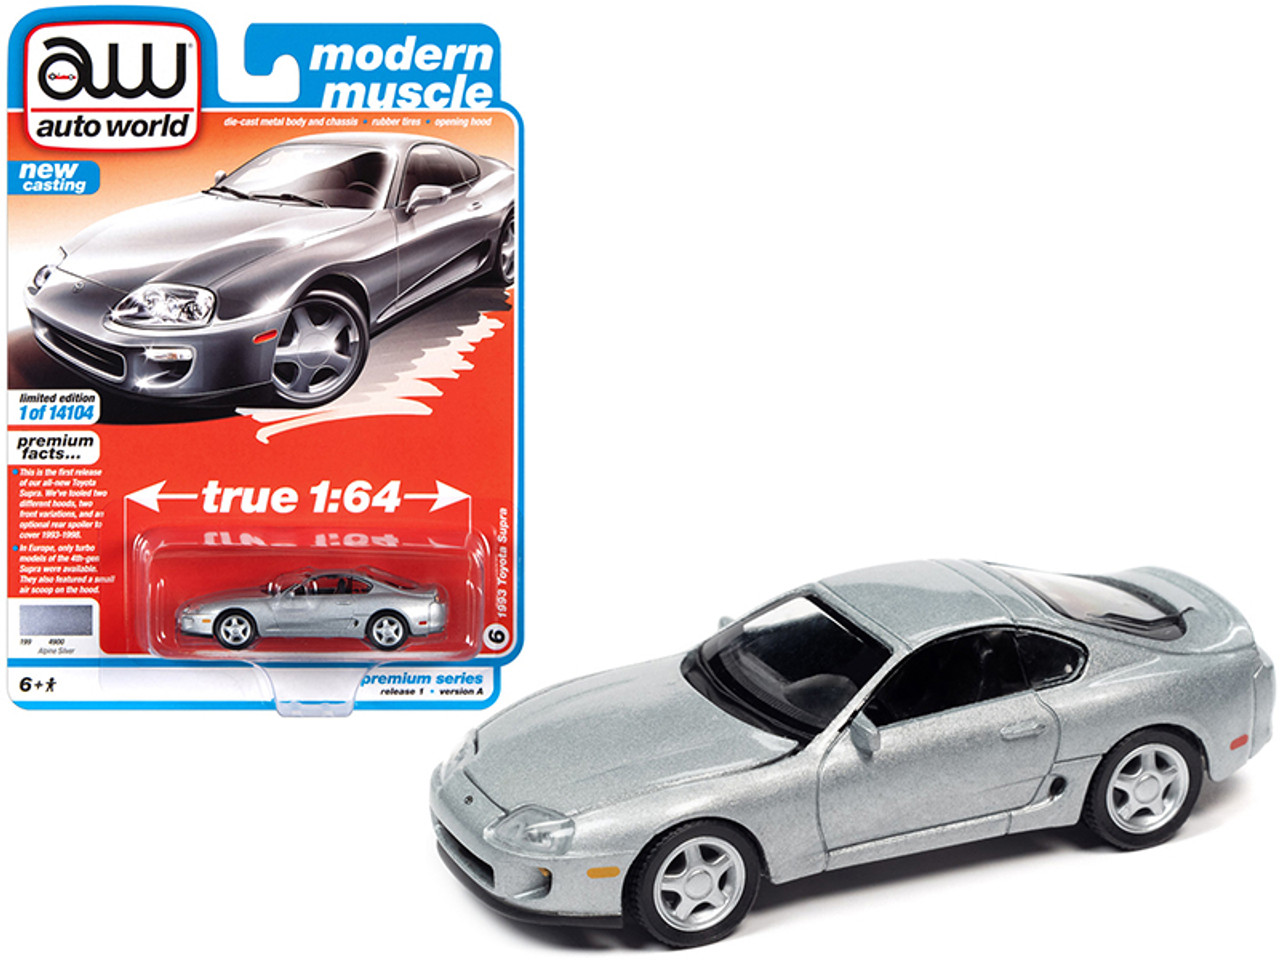 1993 Toyota Supra Alpine Silver "Modern Muscle" Limited Edition to 14104 pieces Worldwide 1/64 Diecast Model Car by Autoworld